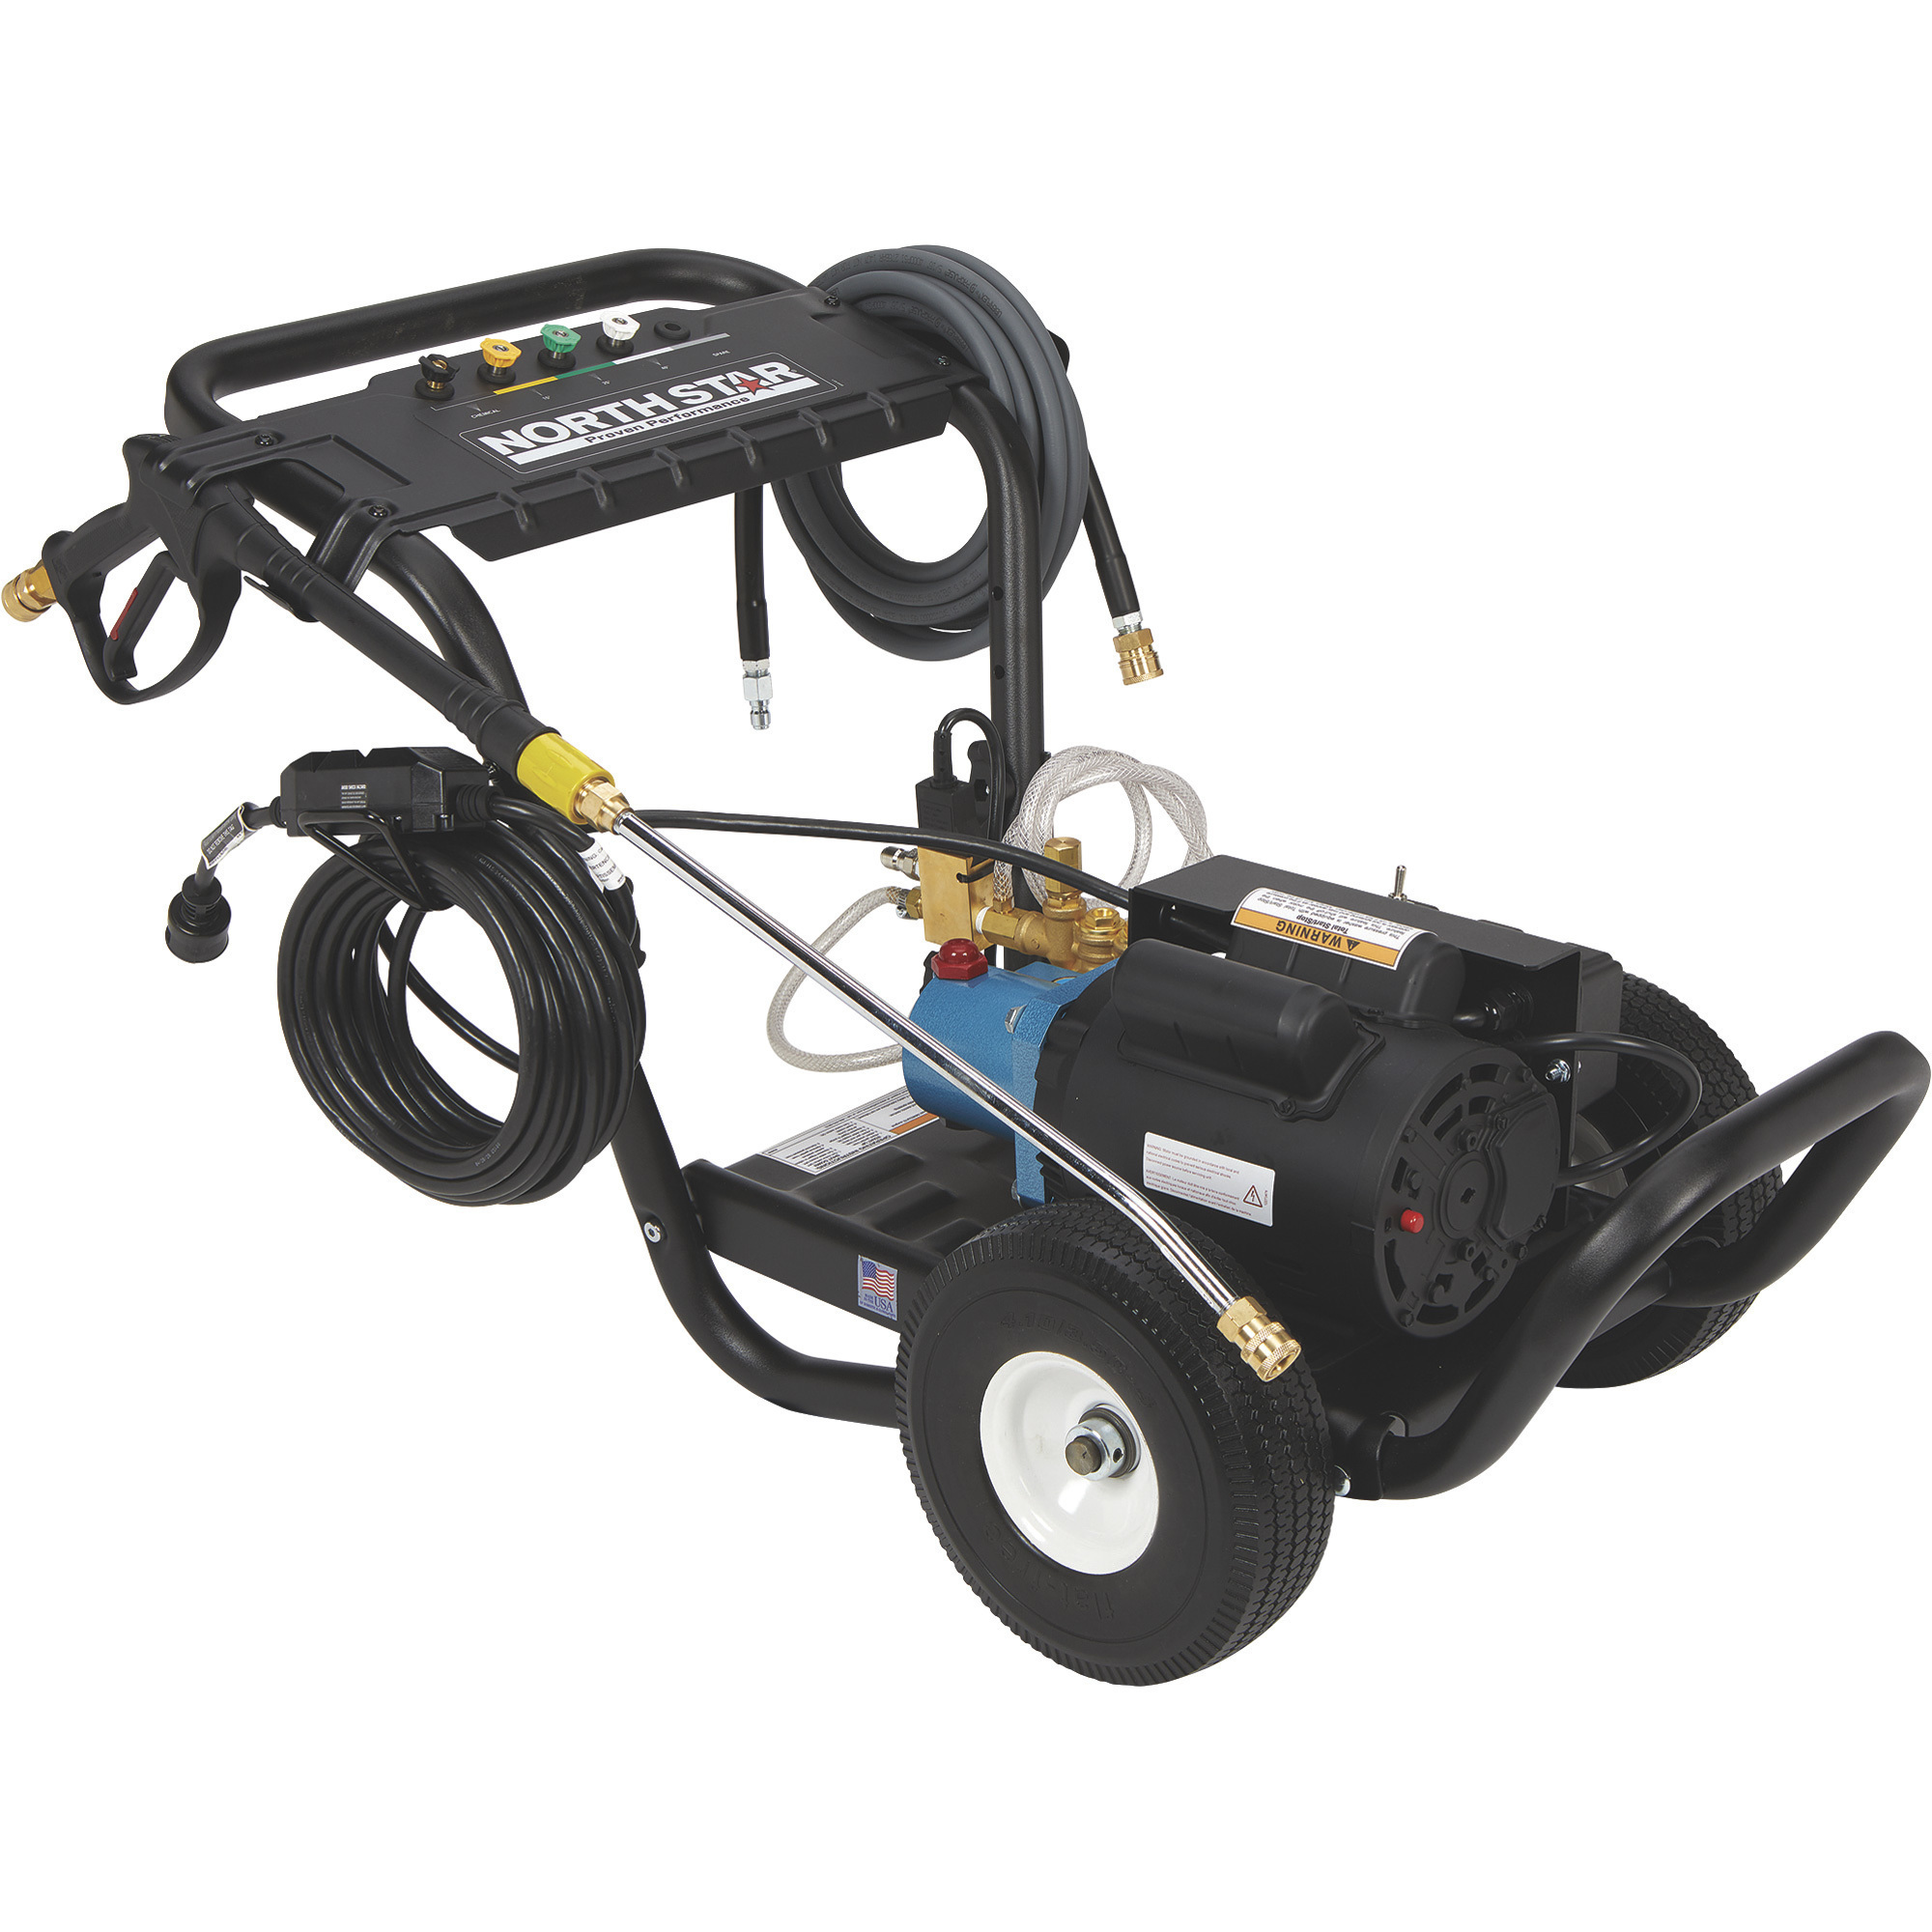 NorthStar 2000 PSI, 1.5 GPM, 120 Volt Electric Cold Water Total Start/Stop Pressure Washer